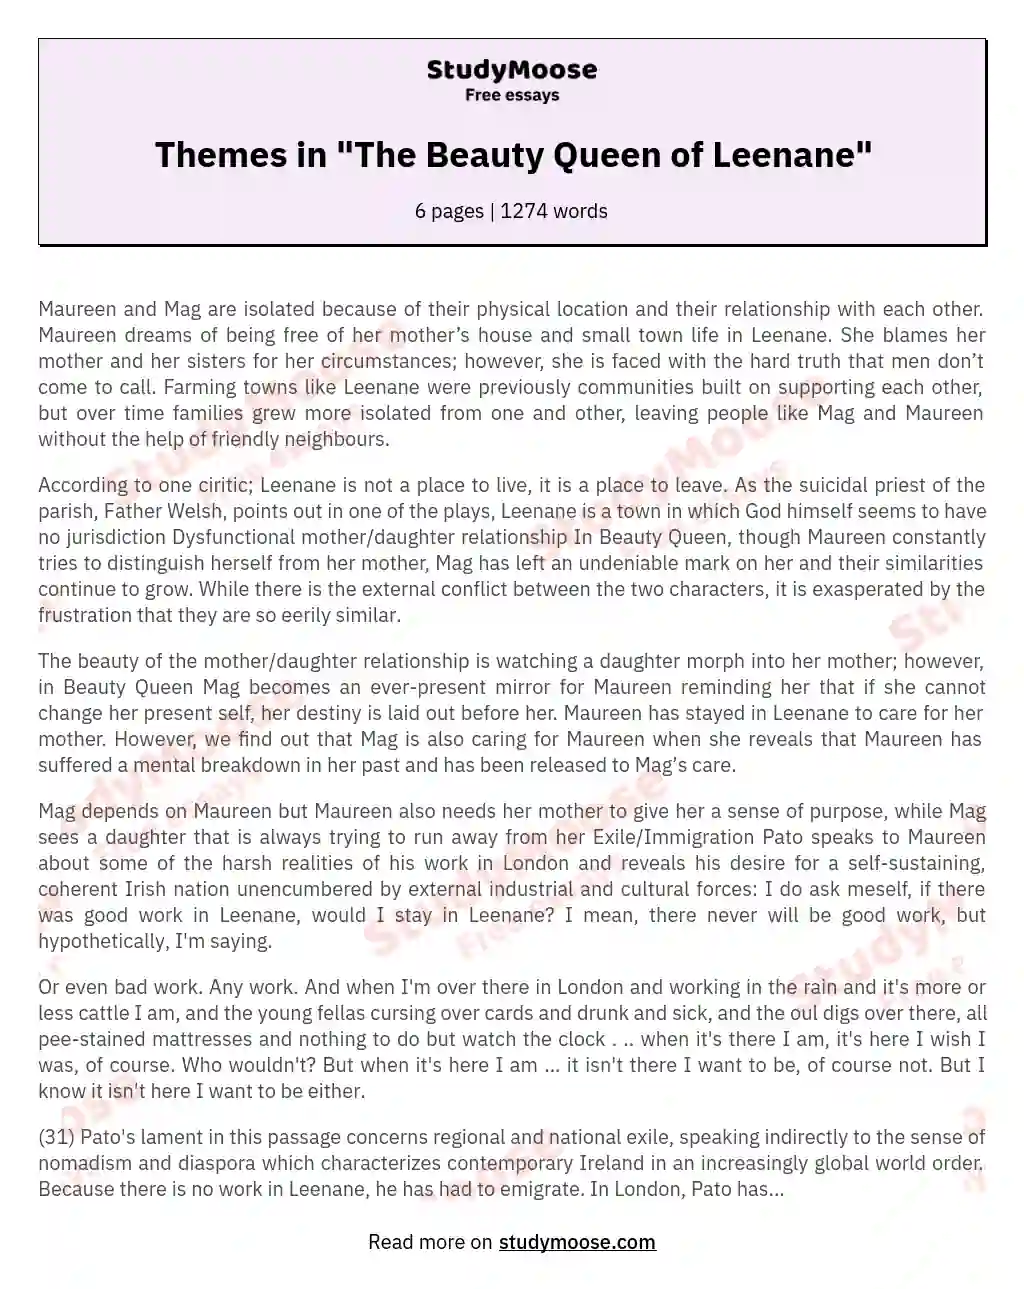 Themes in "The Beauty Queen of Leenane" essay